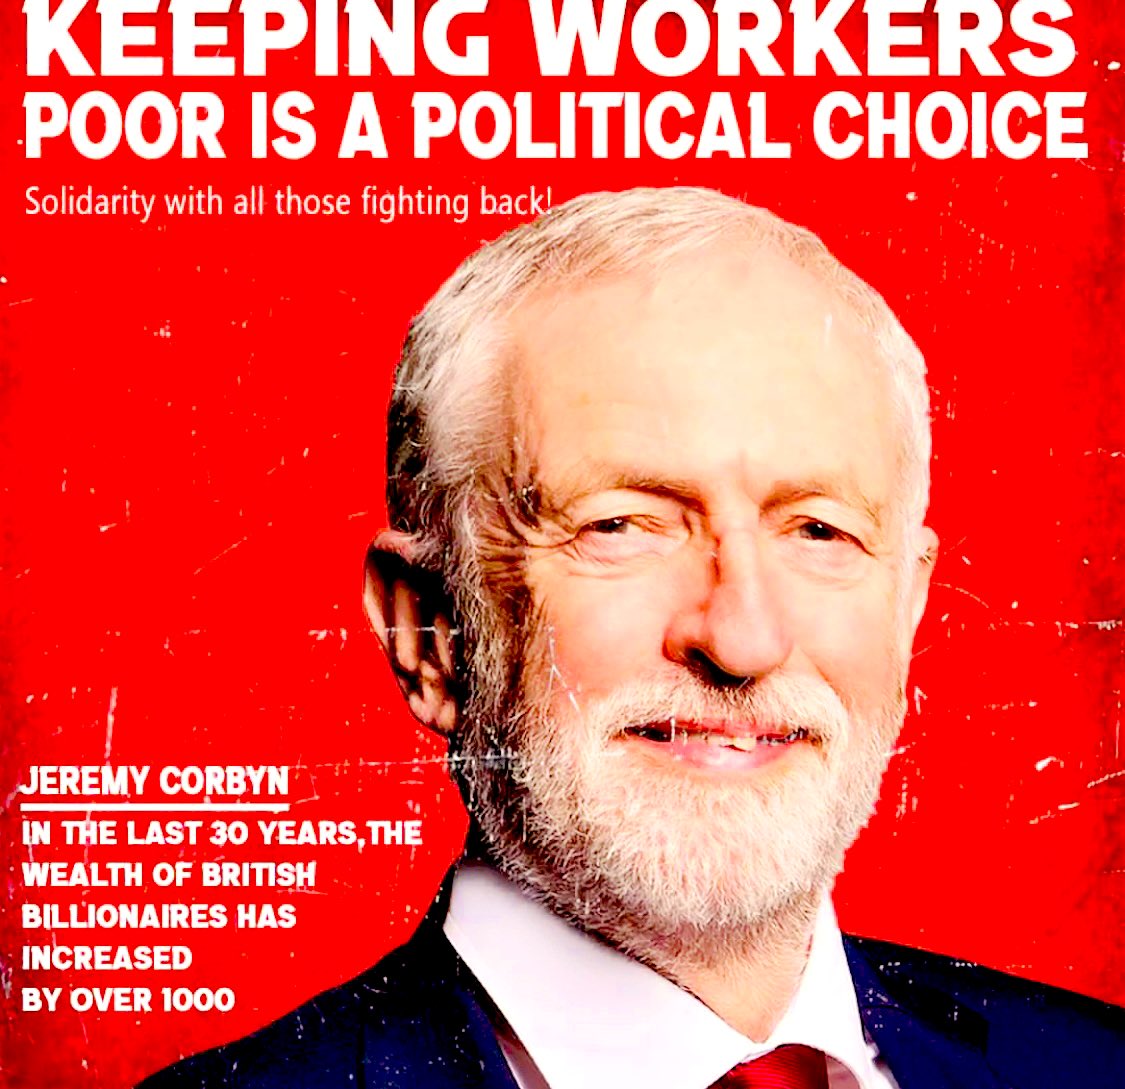 #JeremyCorbyn keeping workers poor is a political choice by the British Ruling System. #RailStrikes
#RMTstrikes #Solidarity ✊✊✊